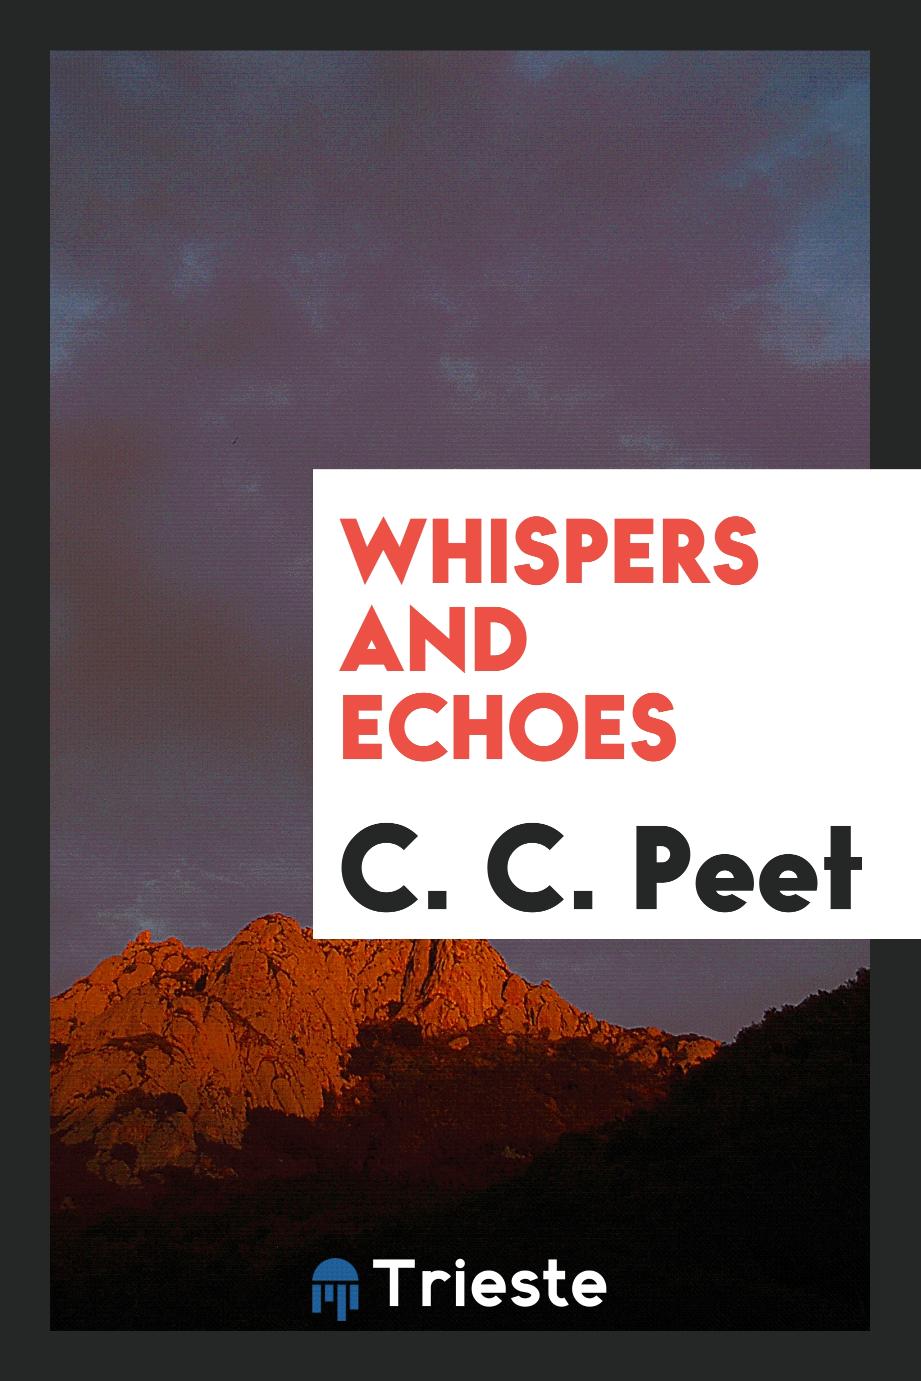 Whispers and echoes